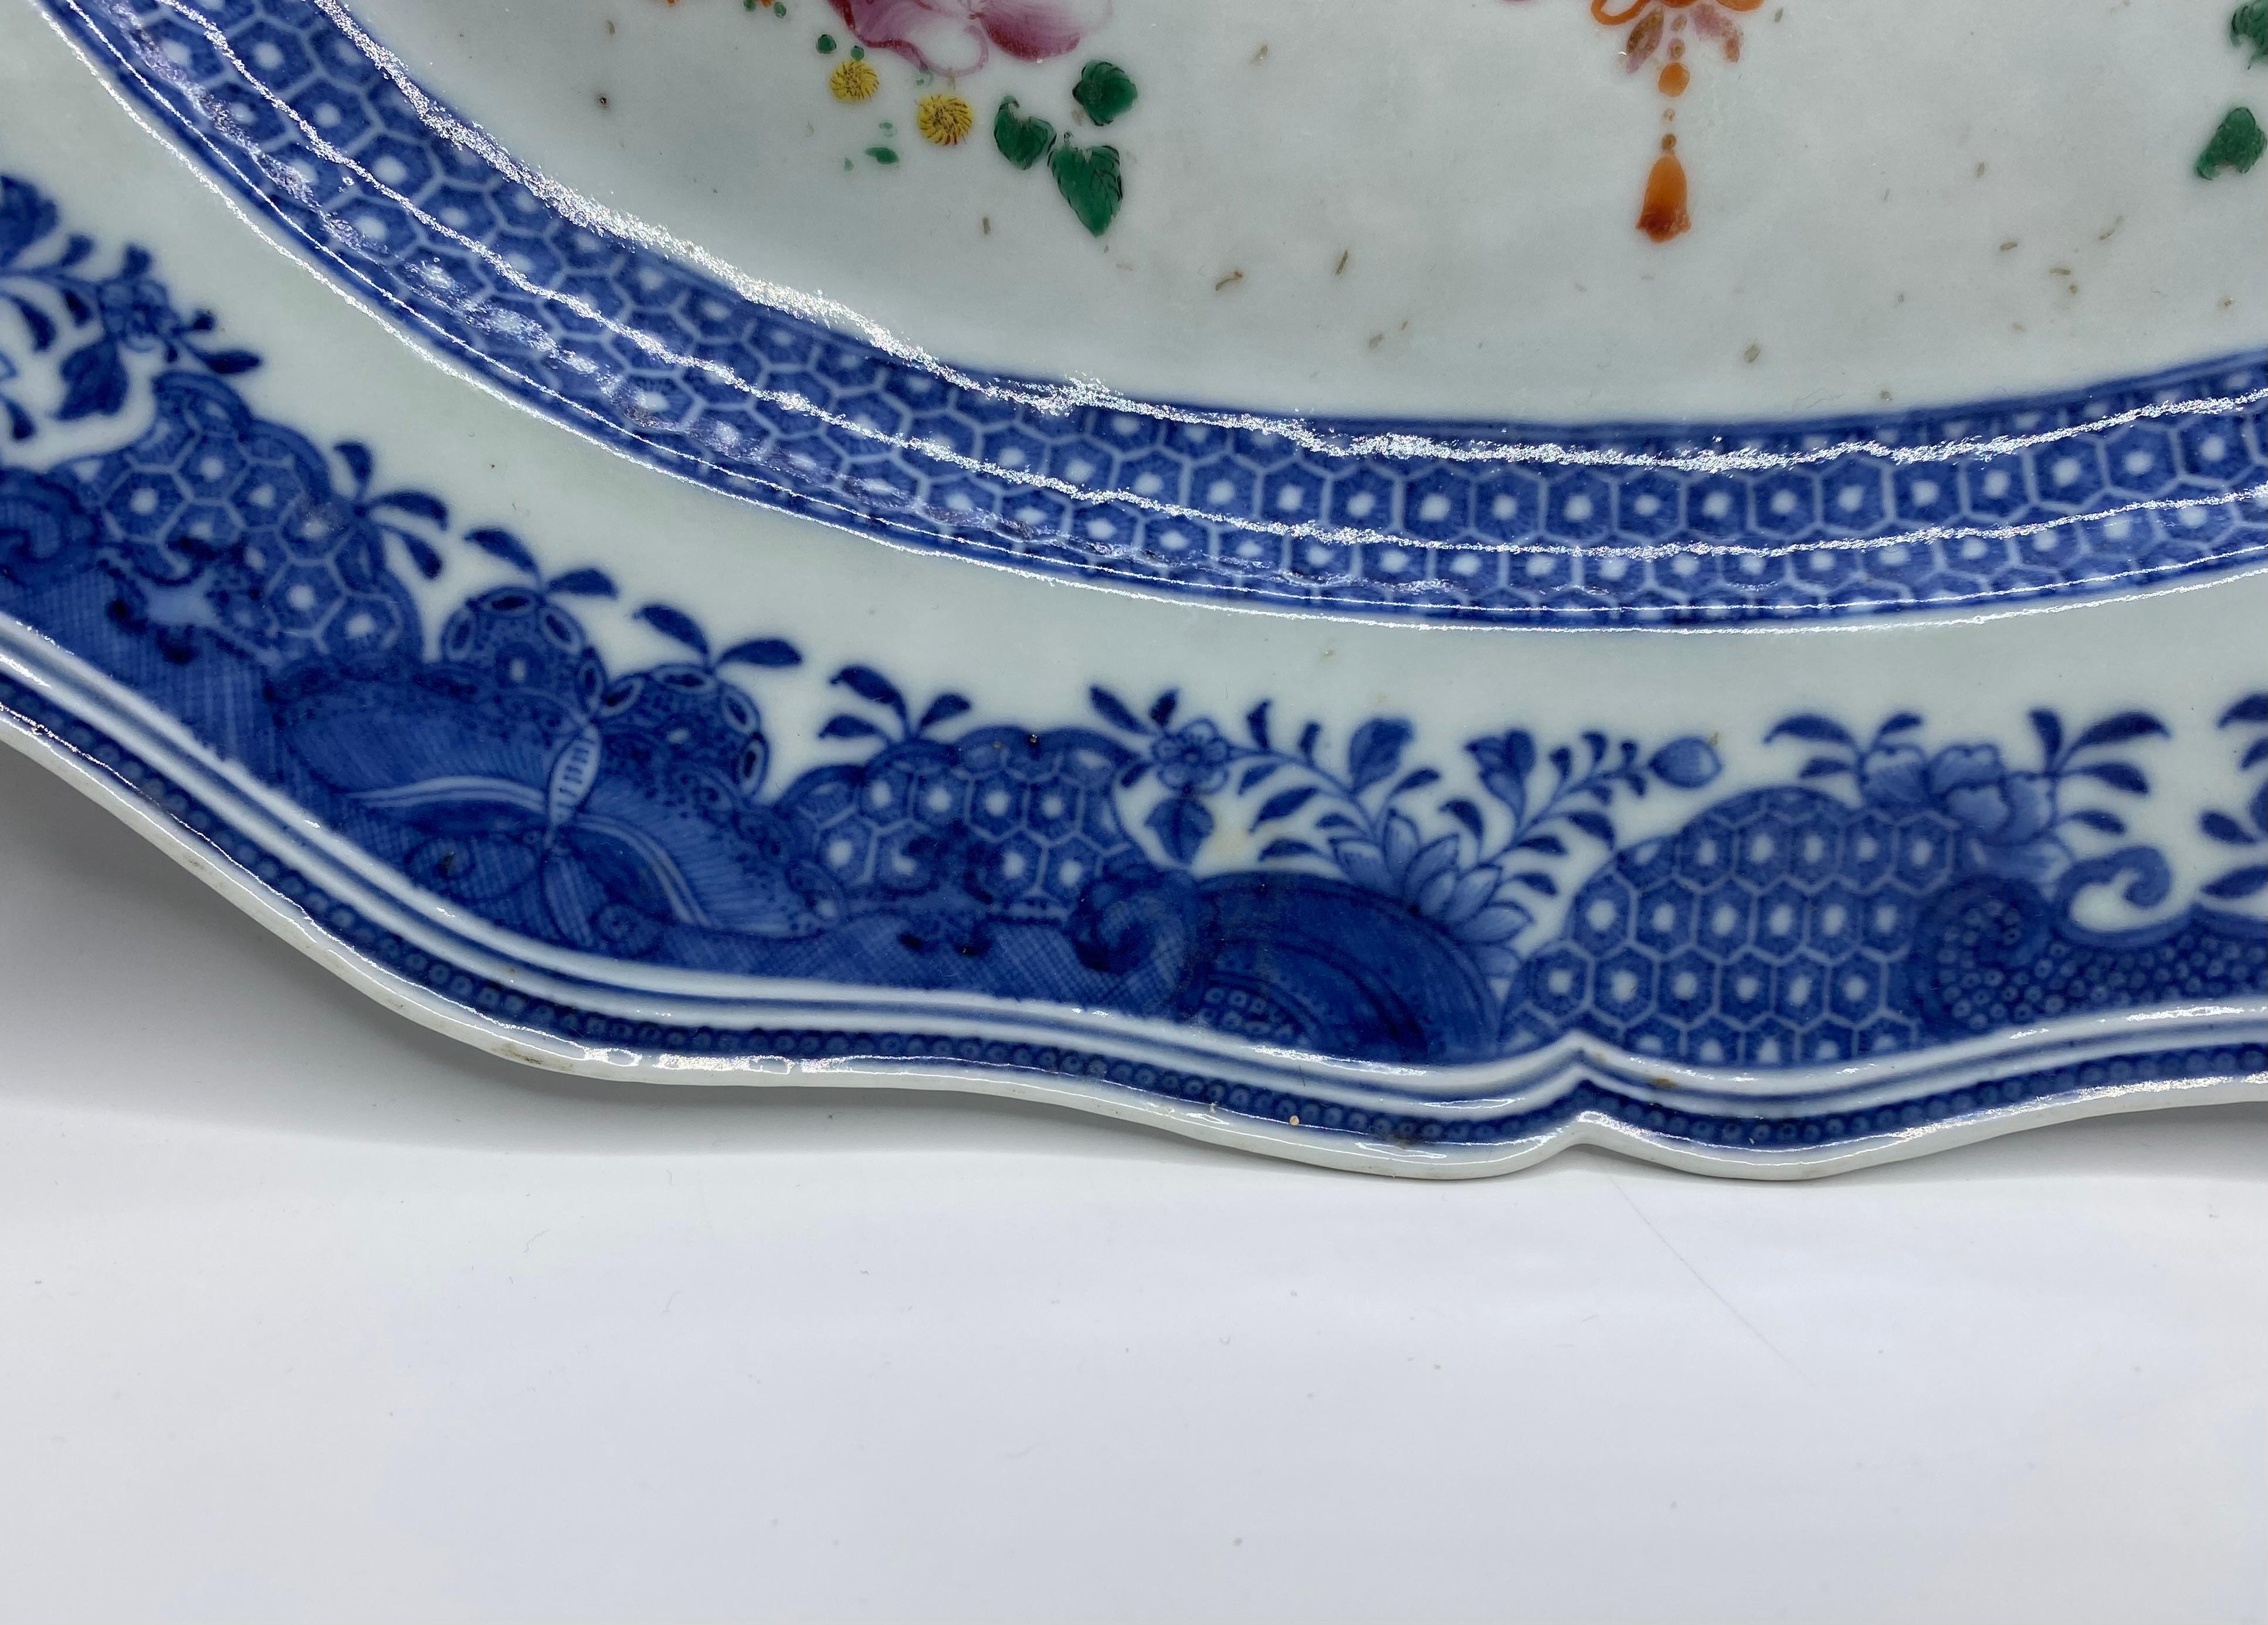 Fired Chinese porcelain platter, Famille rose, c. 1760. Qianlong Period. For Sale